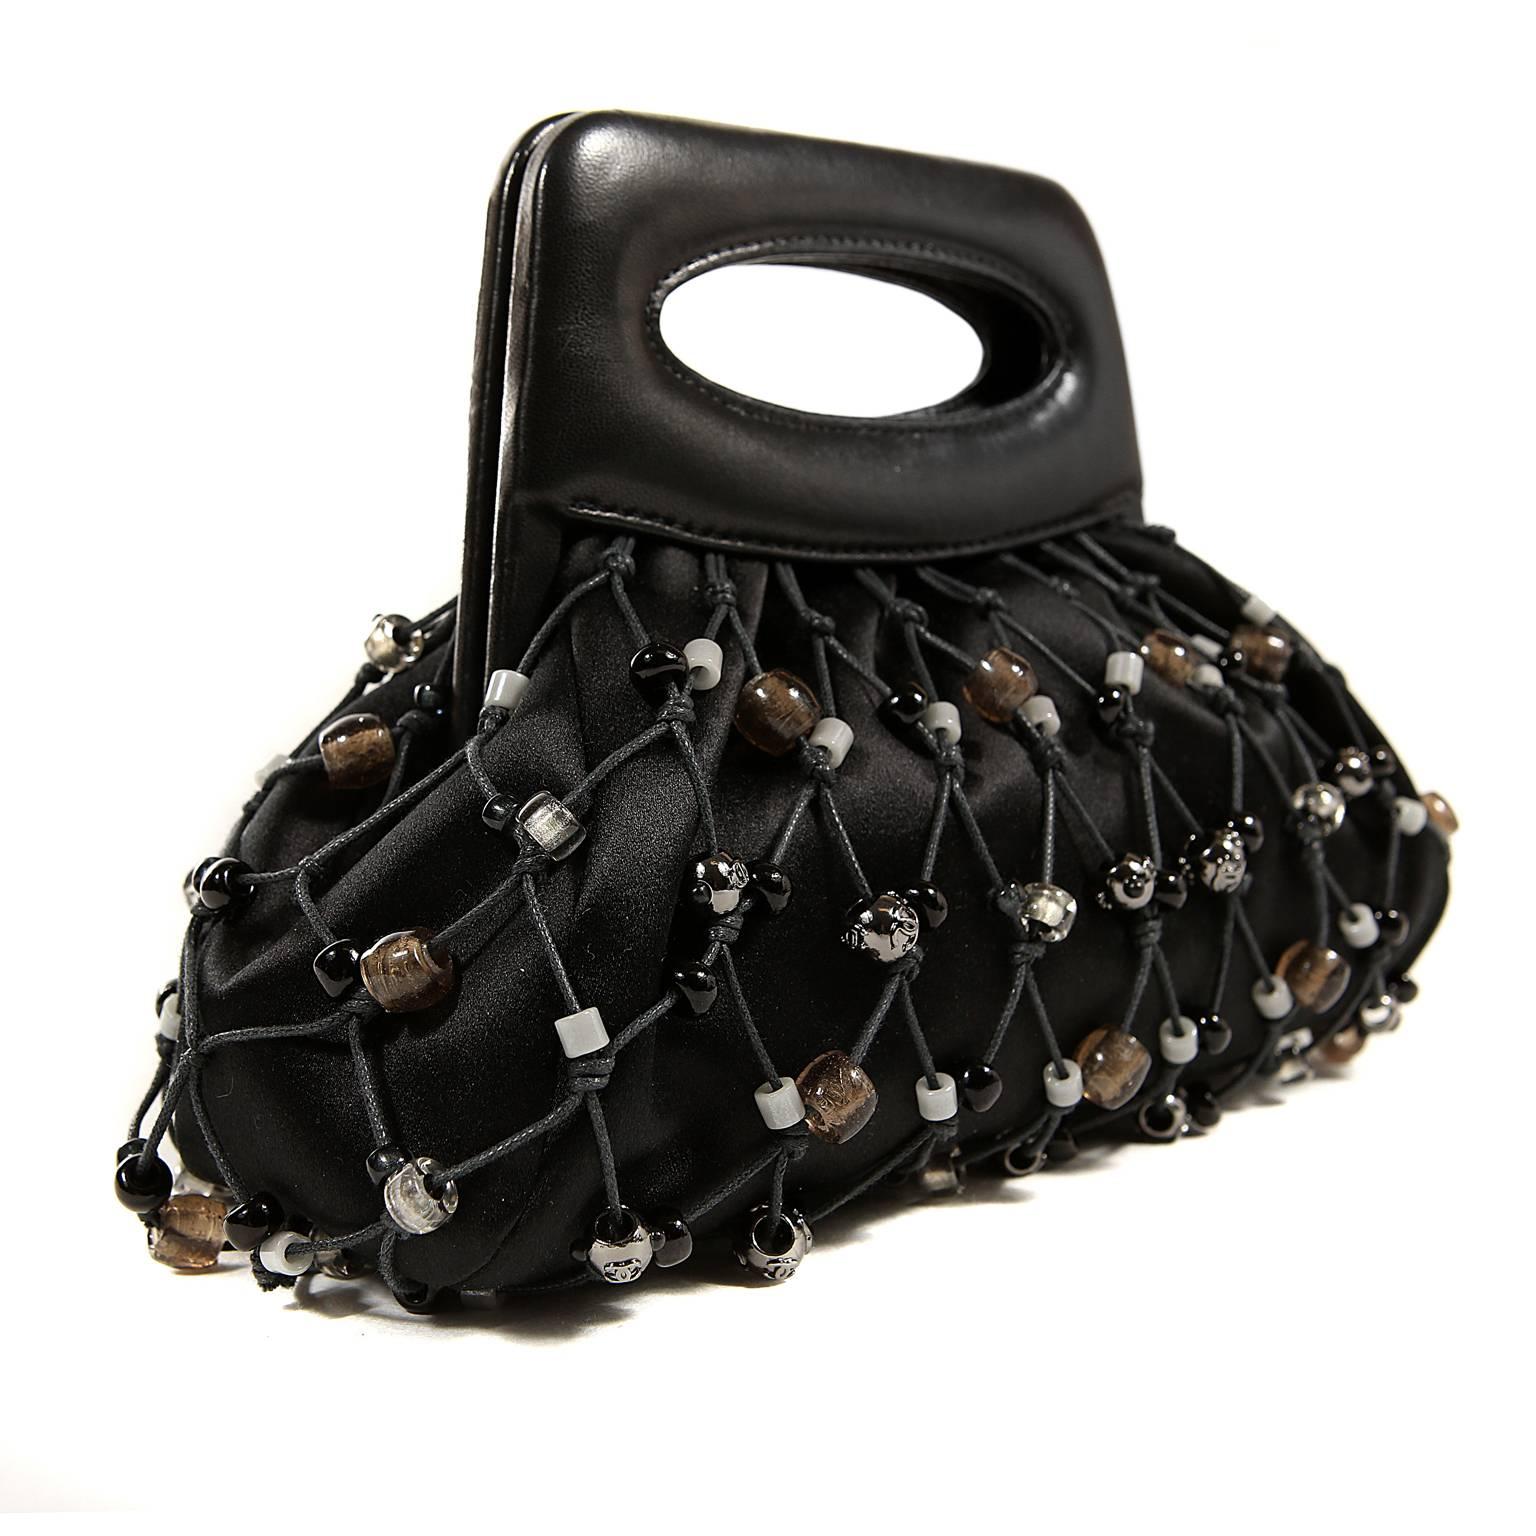 Chanel Black Satin Beaded Mesh Evening Bag- PRISTINE
 Elegant and unique, the neutral beading and mesh applique give this Chanel artistic flair. 
Black satin bag is surrounded by mesh netting that is further enhanced with neutral colored beads. 